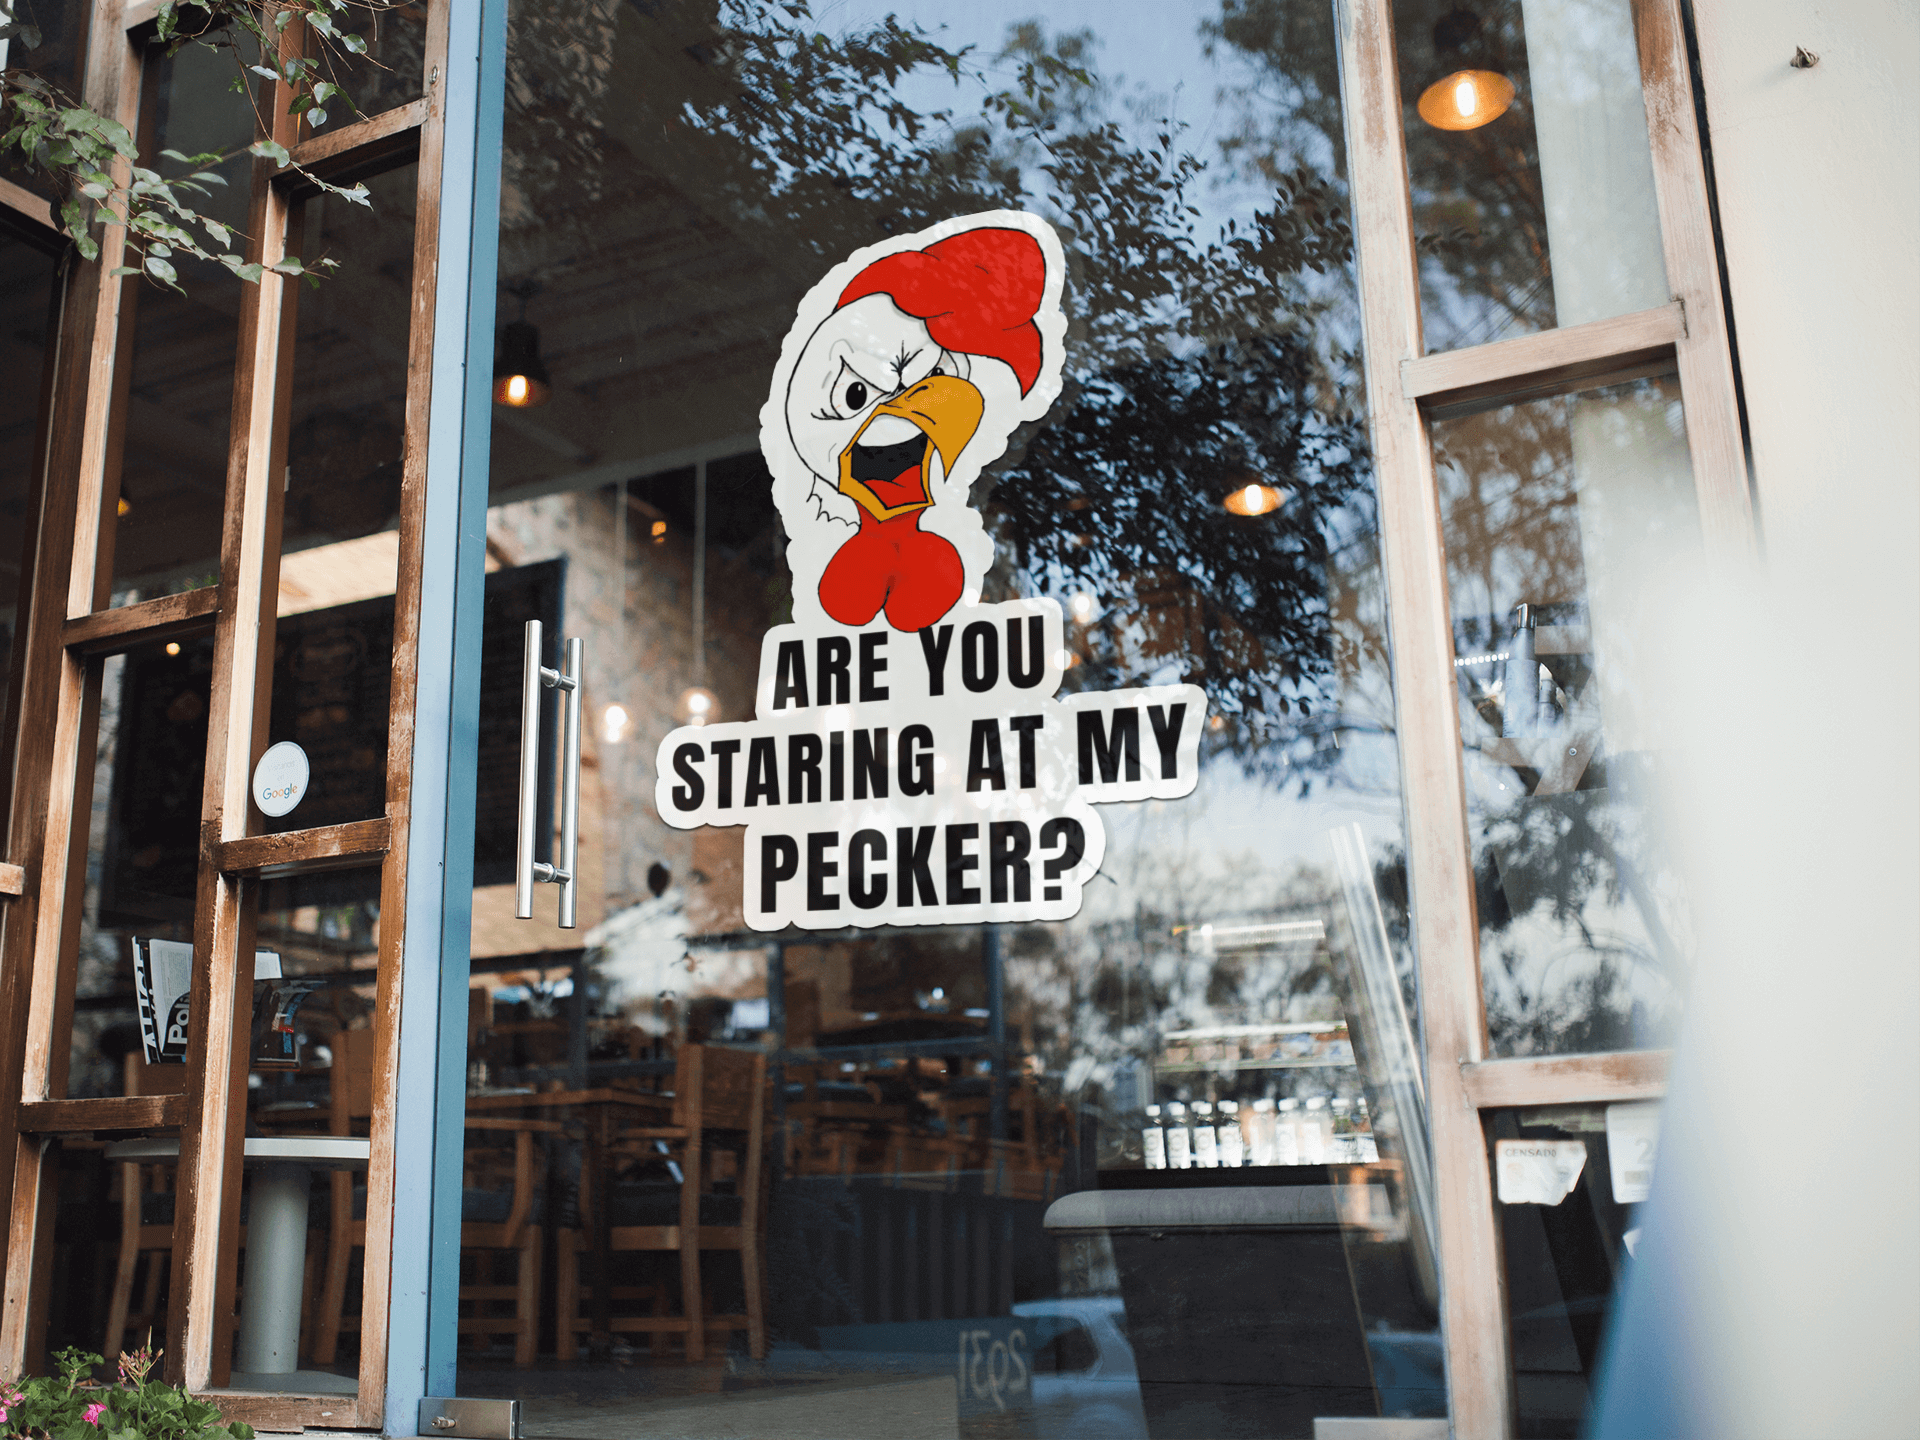 Are you staring at my PECKER ? Bubble-free stickers Chicken Cock dick meat stick Pecker Penis Rooster schlong Stiicker Vinyl